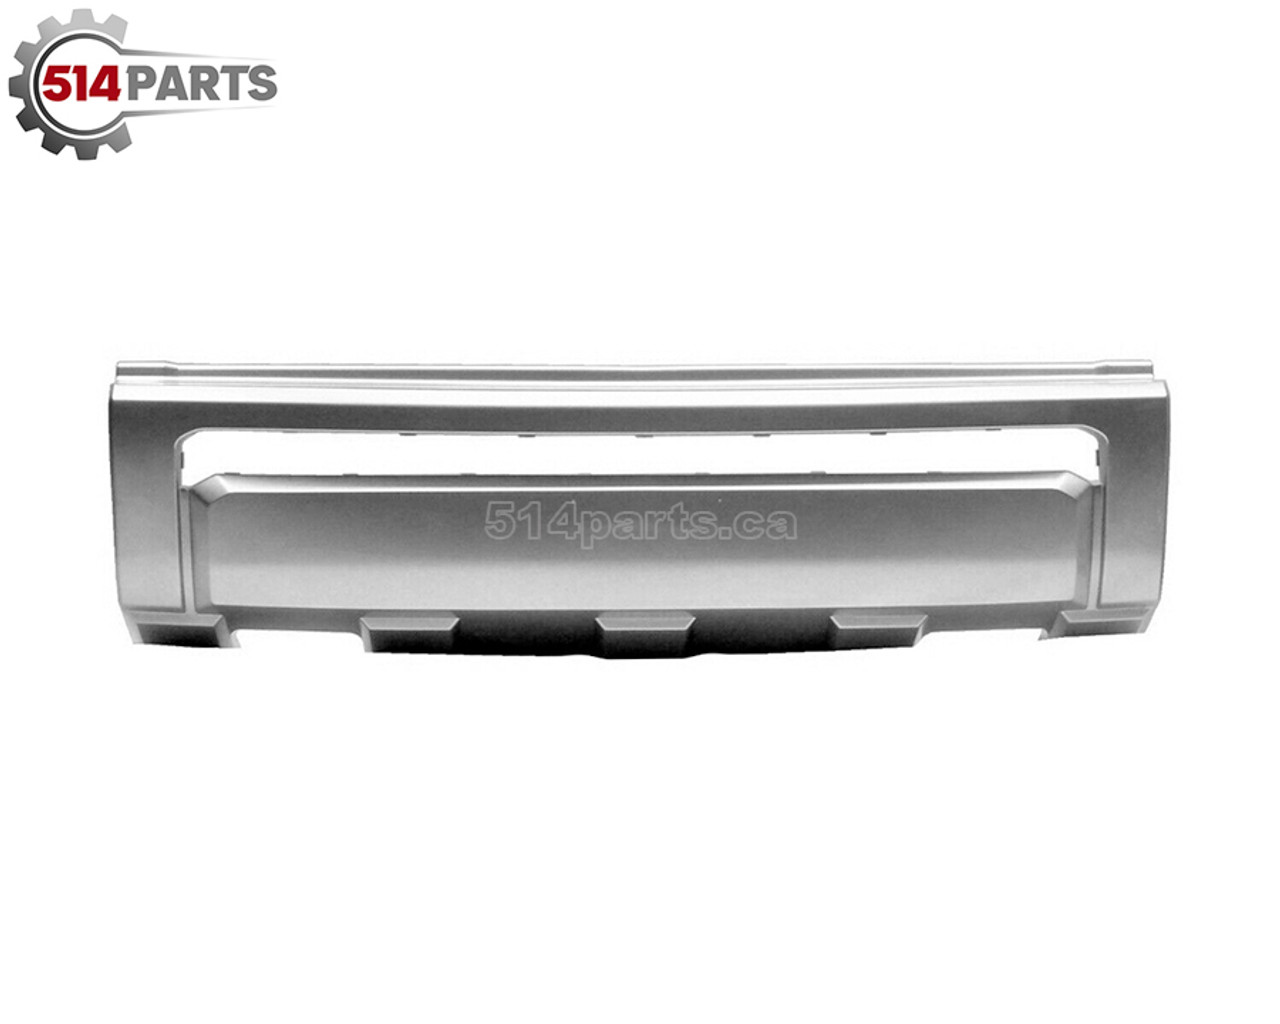 2014 - 2015 TOYOTA TUNDRA PLATINUM and 1795 EDITION MODELS FRONT BUMPER COVER SILVER-GRAY - PARE-CHOC AVANT GRIS-ARGENT